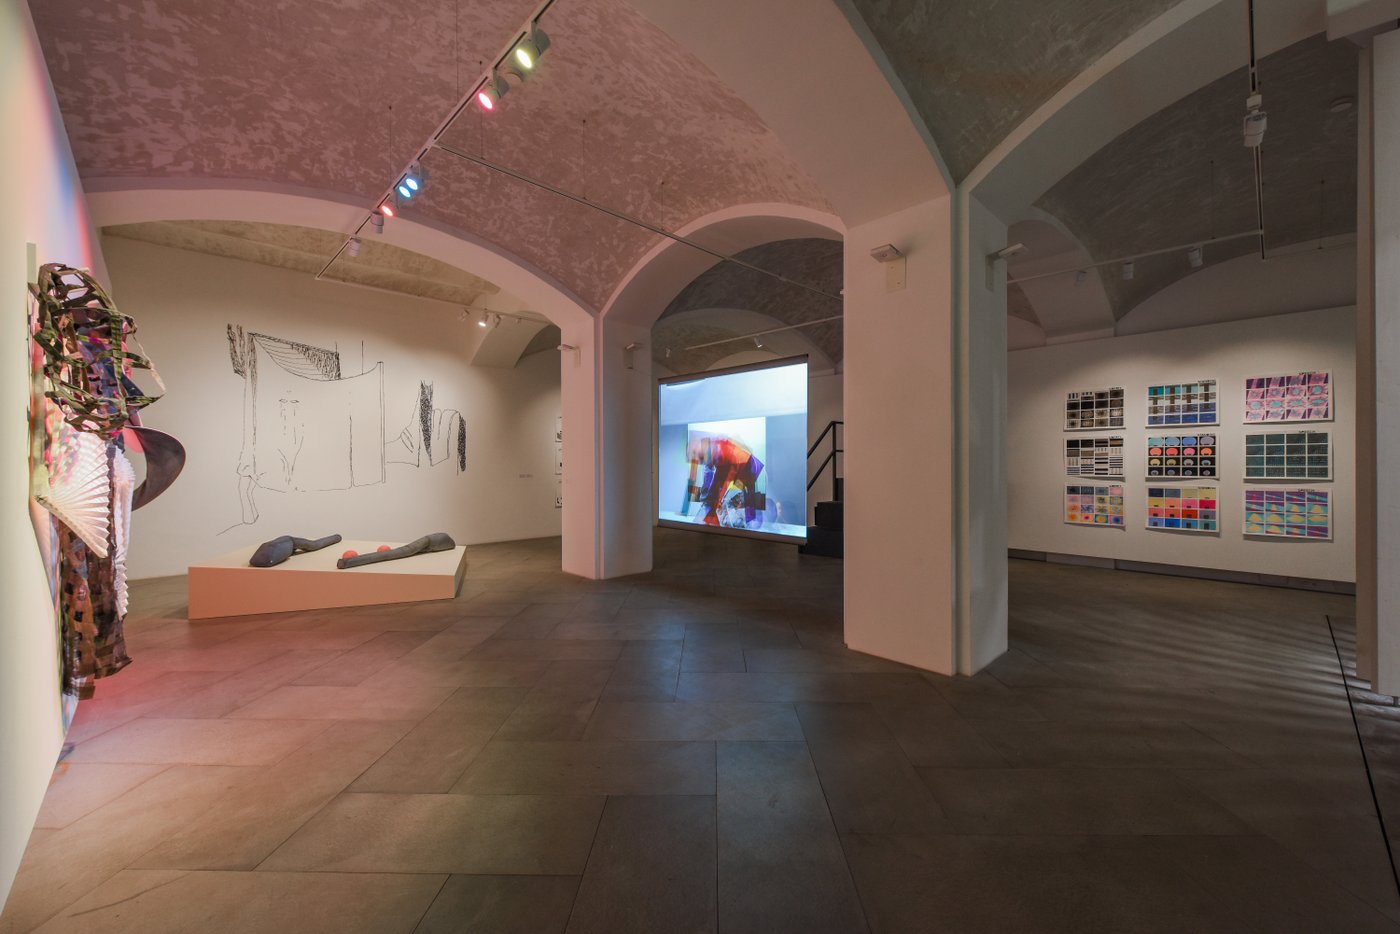 In the basement with vaulted ceiling you can see various works. An expansive wall object, a wall drawing, textile objects on a slanted pedestal, a film screen and 6 framed serial paintings.